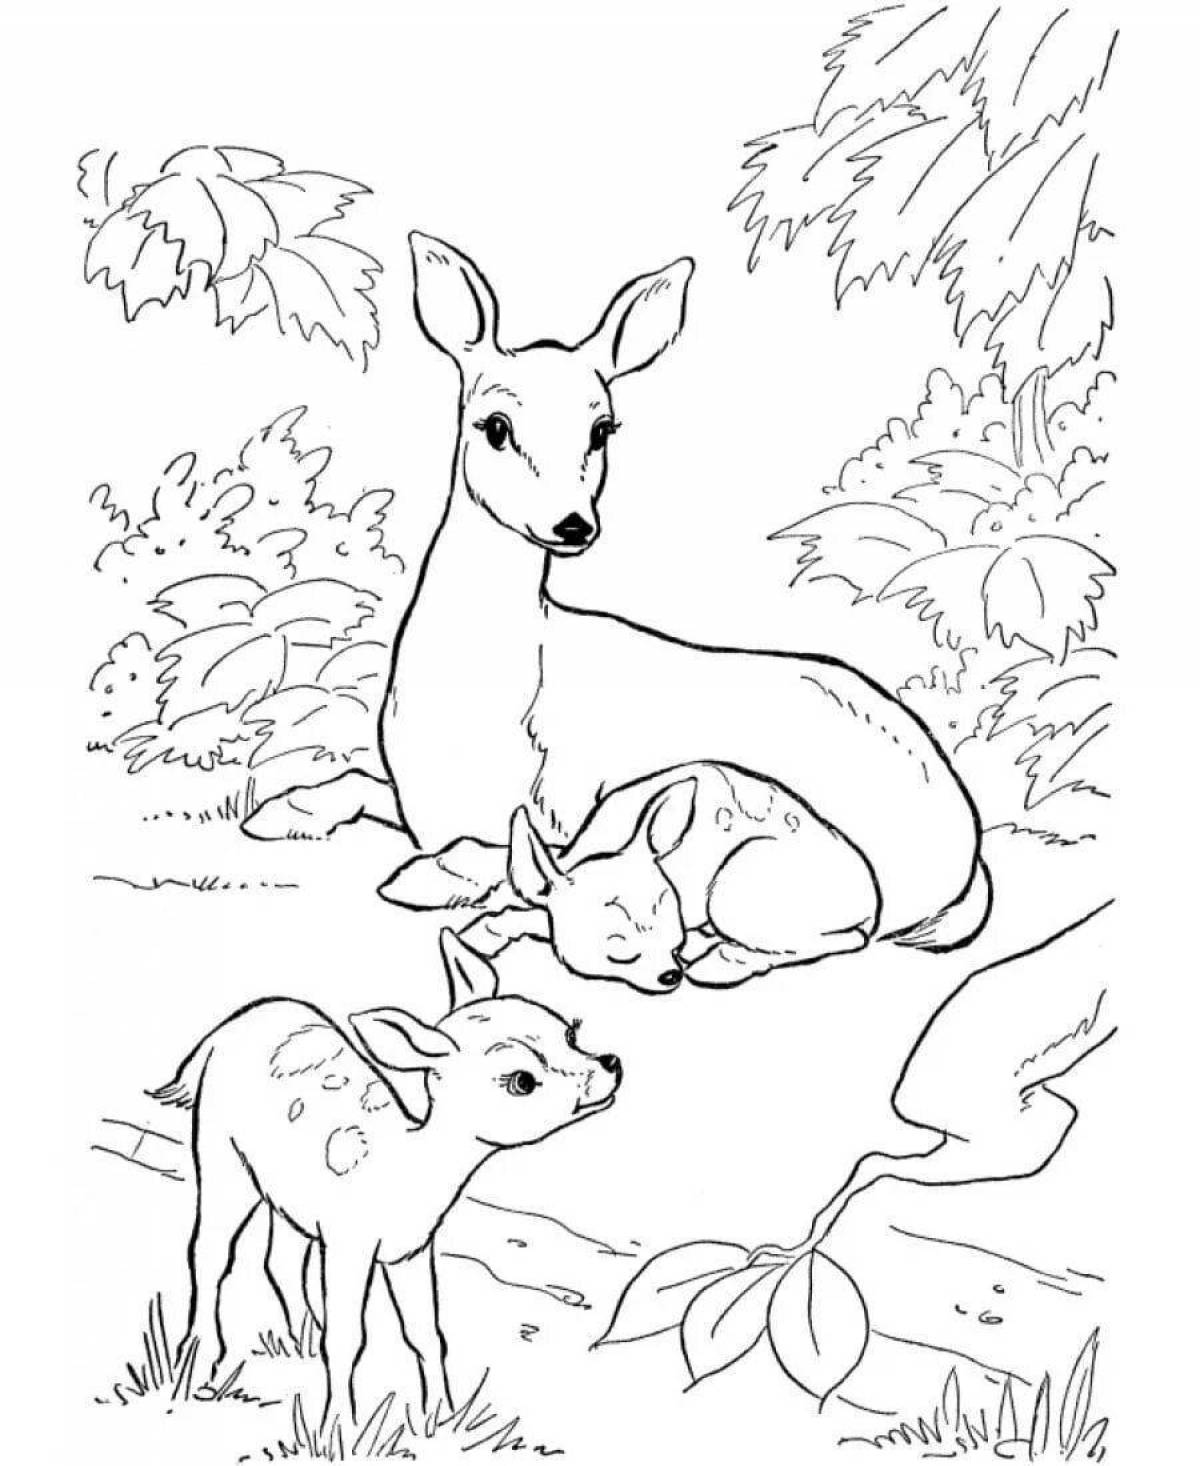 Colorful wild animals and wild beasts coloring book